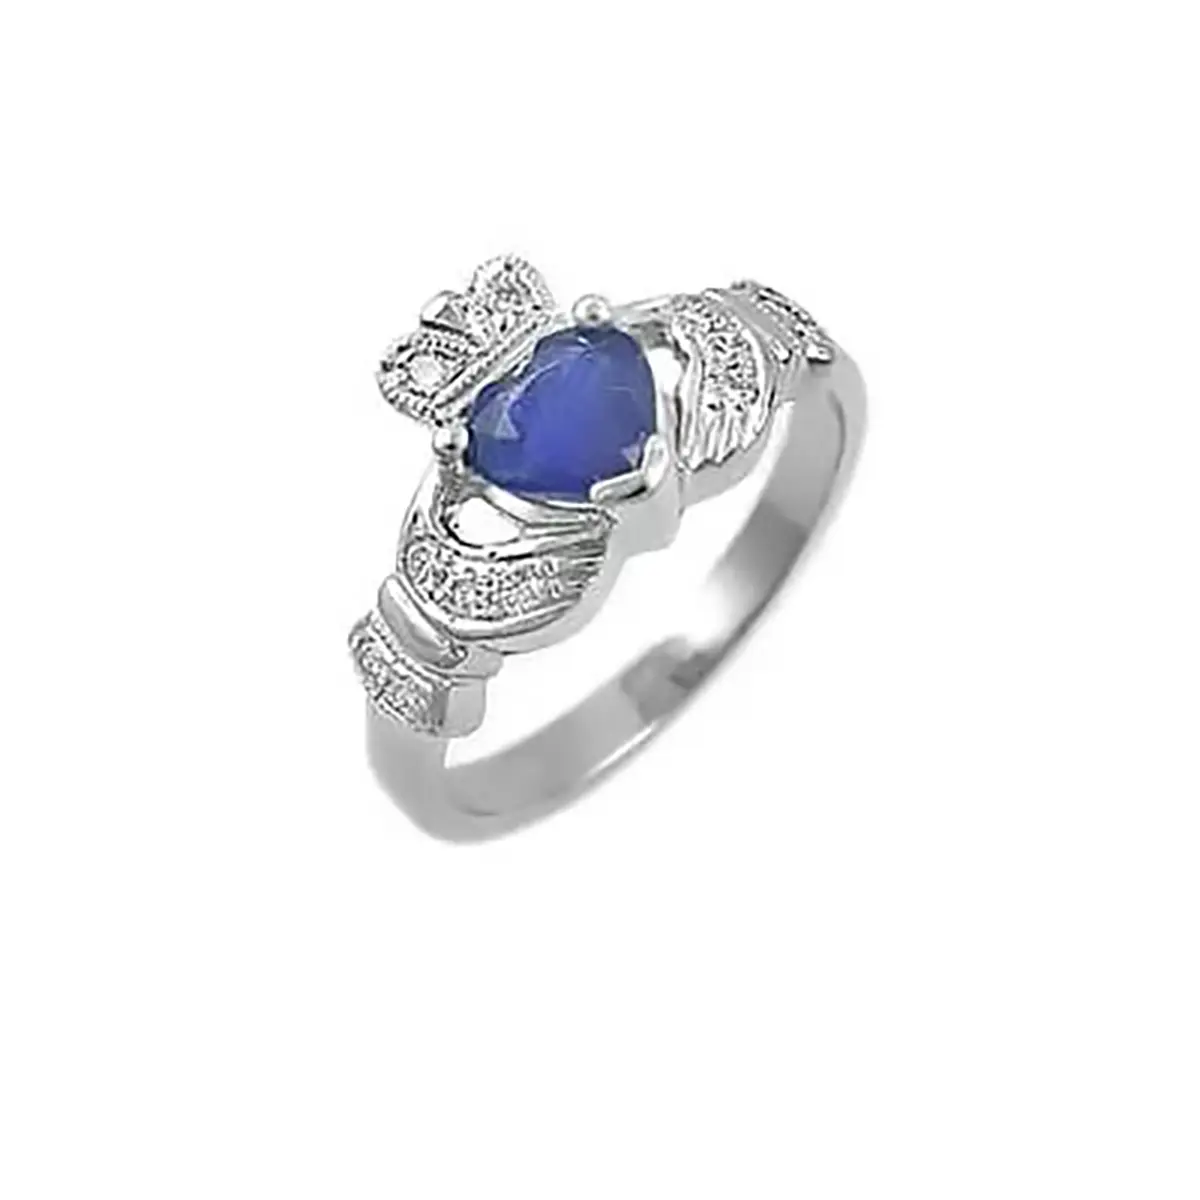 Unique Sapphire Claddagh Ring, Crafted In Ireland With White Gold And ...